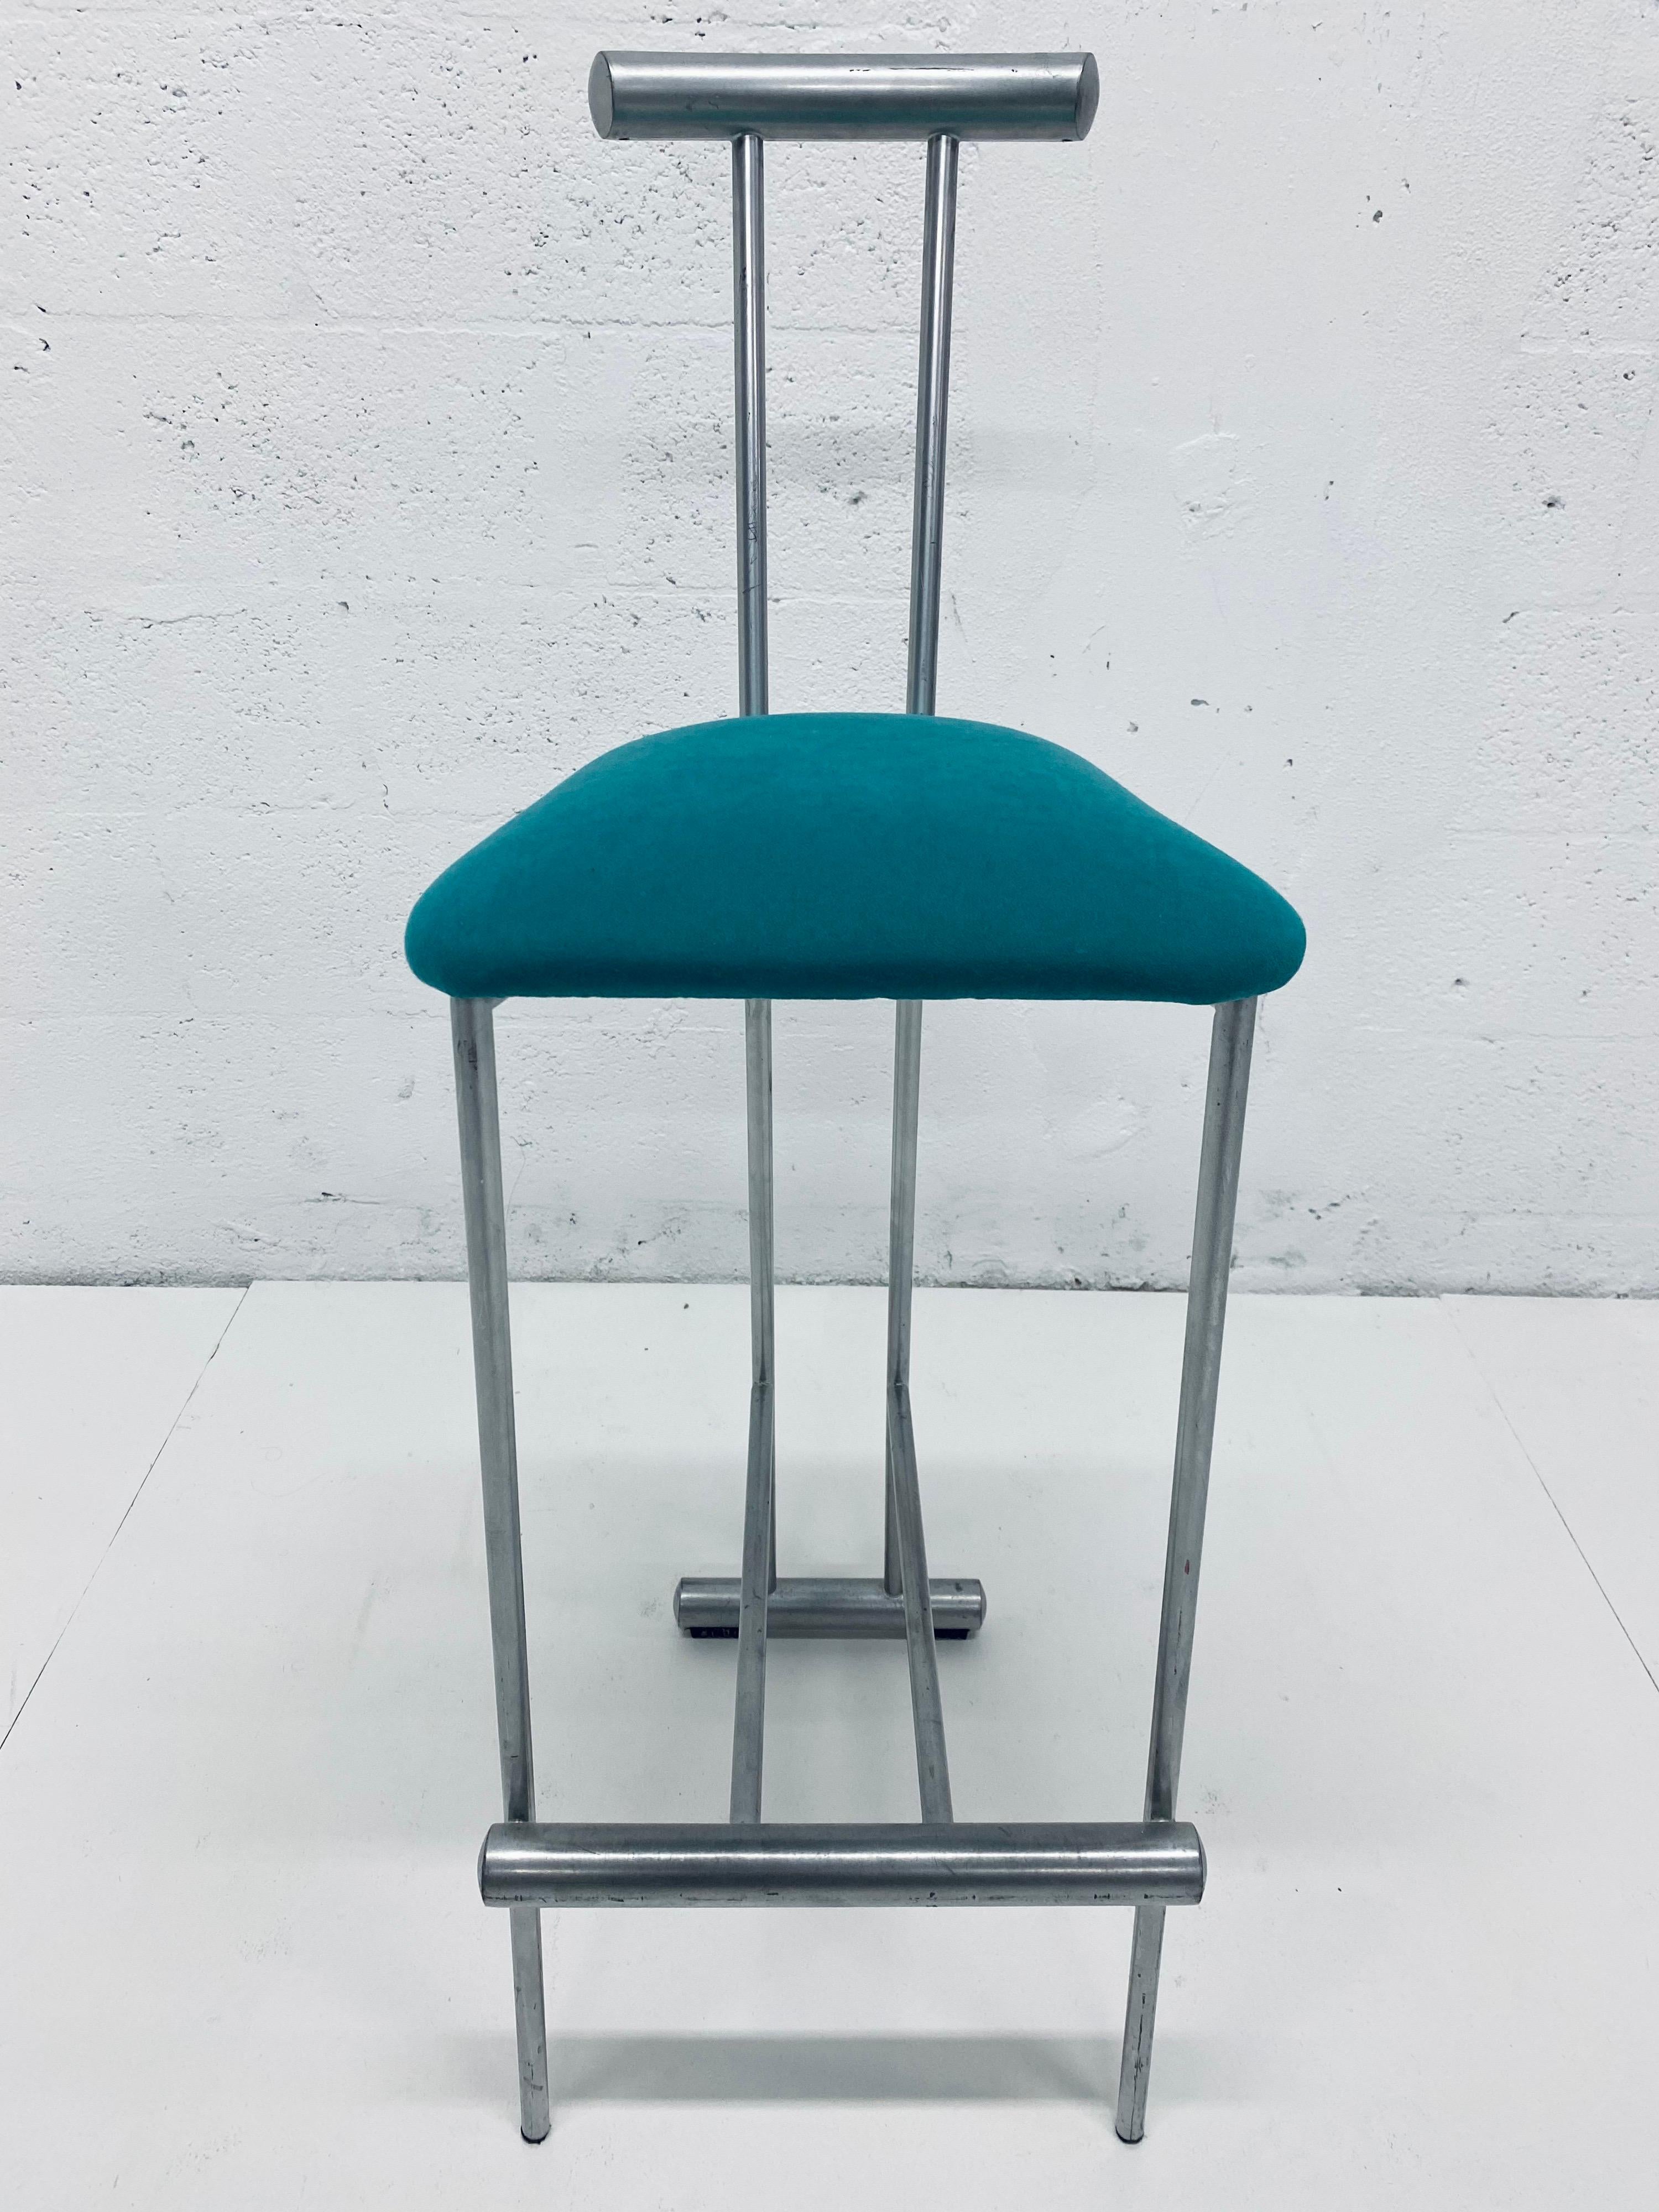 Single bar stool in the style of Memphis Milano circa 1980s. Teal fabric cover is easily replaceable. Gray tubular steel frame.